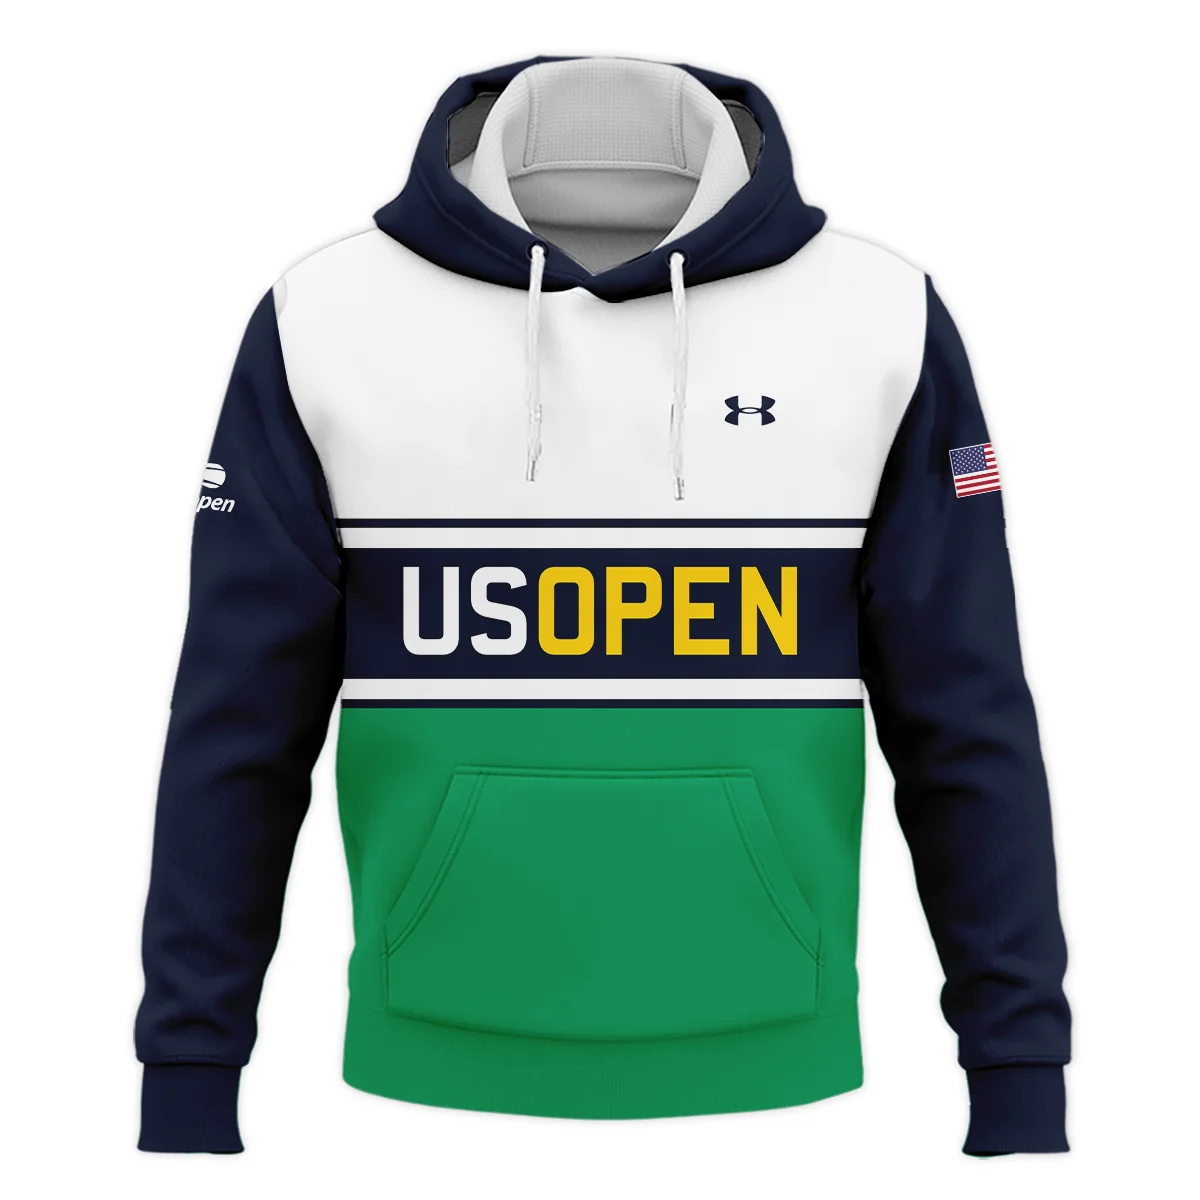 Tennis Love Sport Mix Color US Open Tennis Champions Under Armour Hoodie Shirt Style Classic Hoodie Shirt